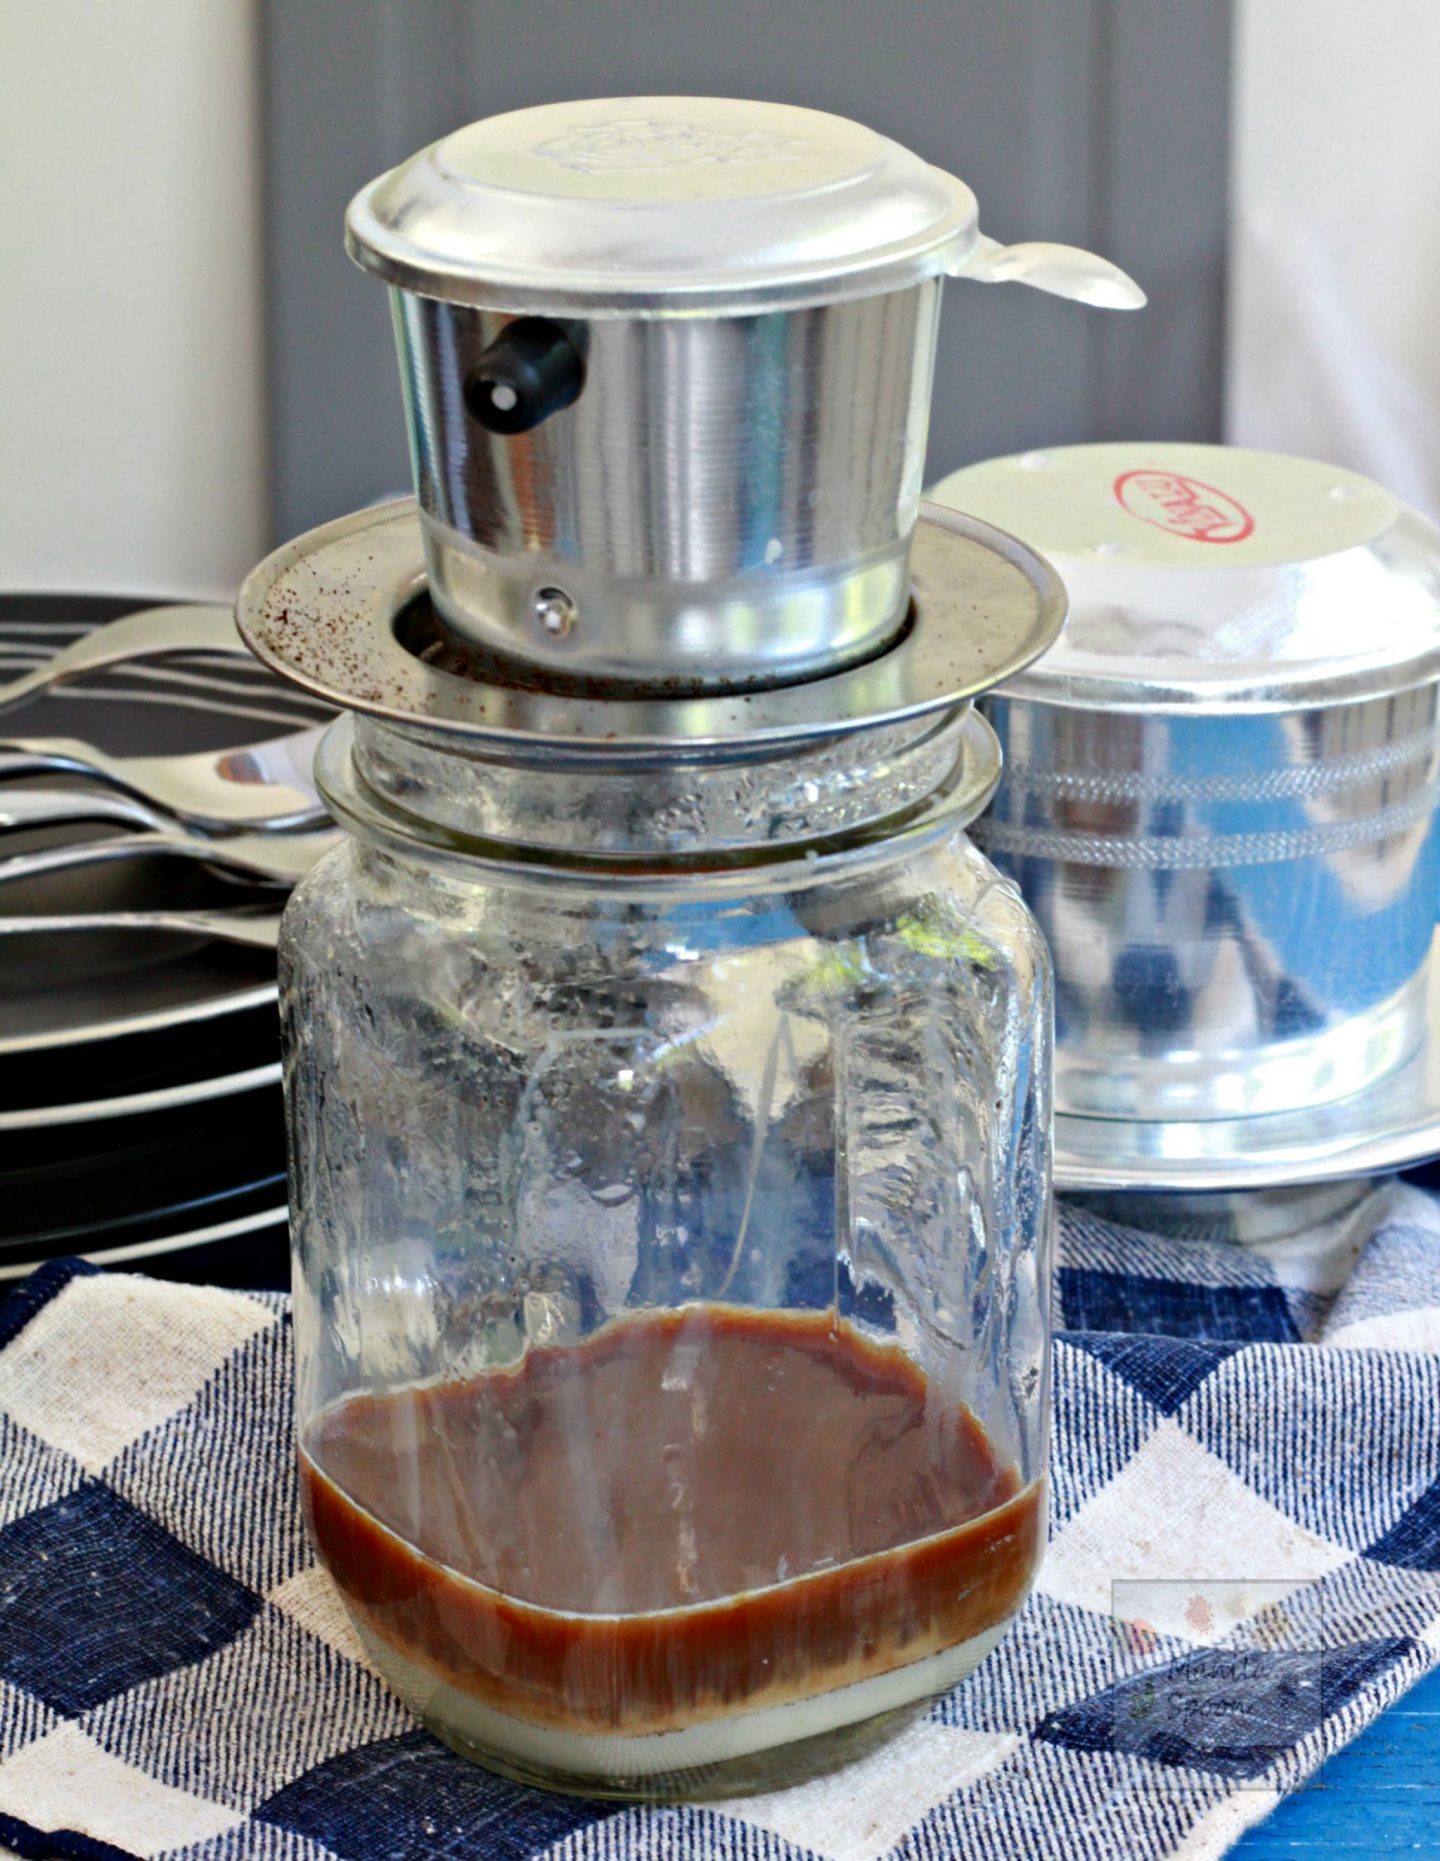 The perfect summer quencher if you're a huge iced coffee fan. Intensely delicious Vietnamese Iced Coffee. Add some tapioca pearls for extra texture and yum!